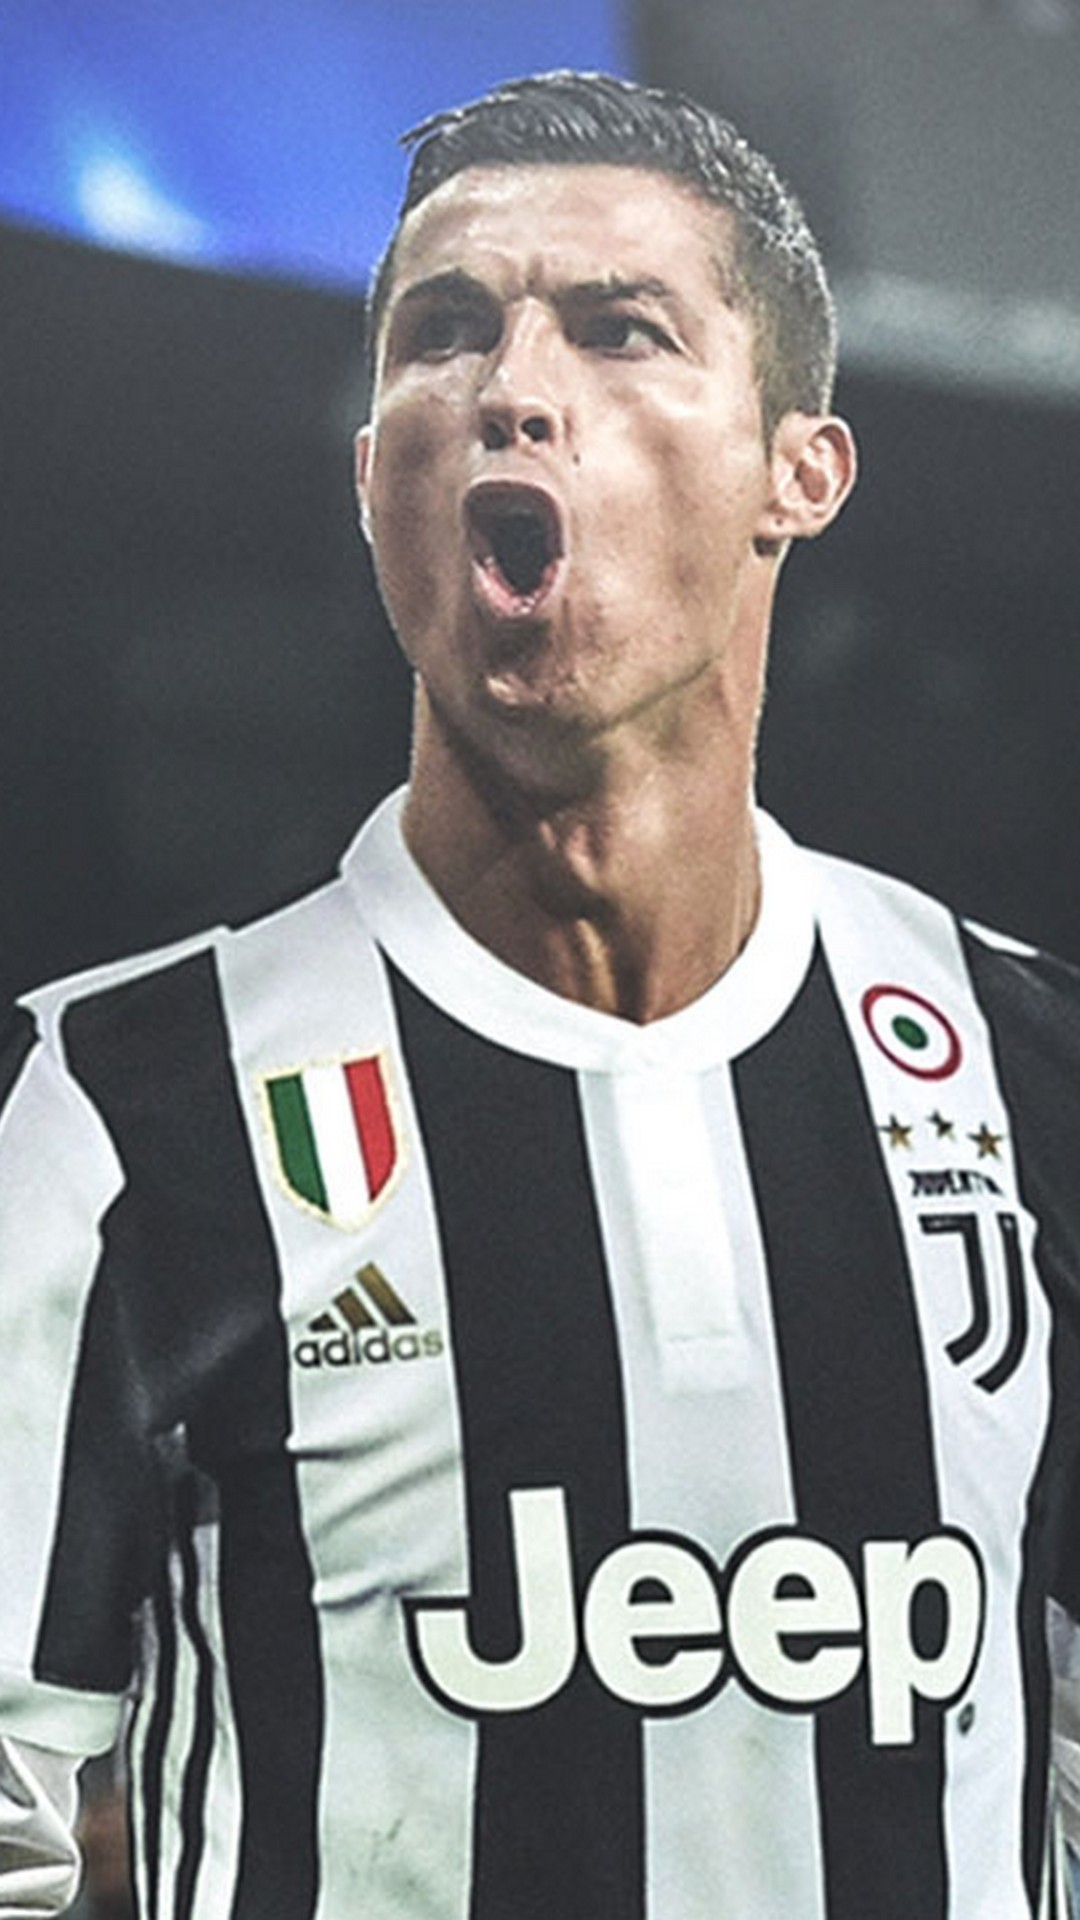 Cristiano Ronaldo Juventus Wallpaper For iPhone with image resolution 1080x1920 pixel. You can make this wallpaper for your iPhone 5, 6, 7, 8, X backgrounds, Mobile Screensaver, or iPad Lock Screen